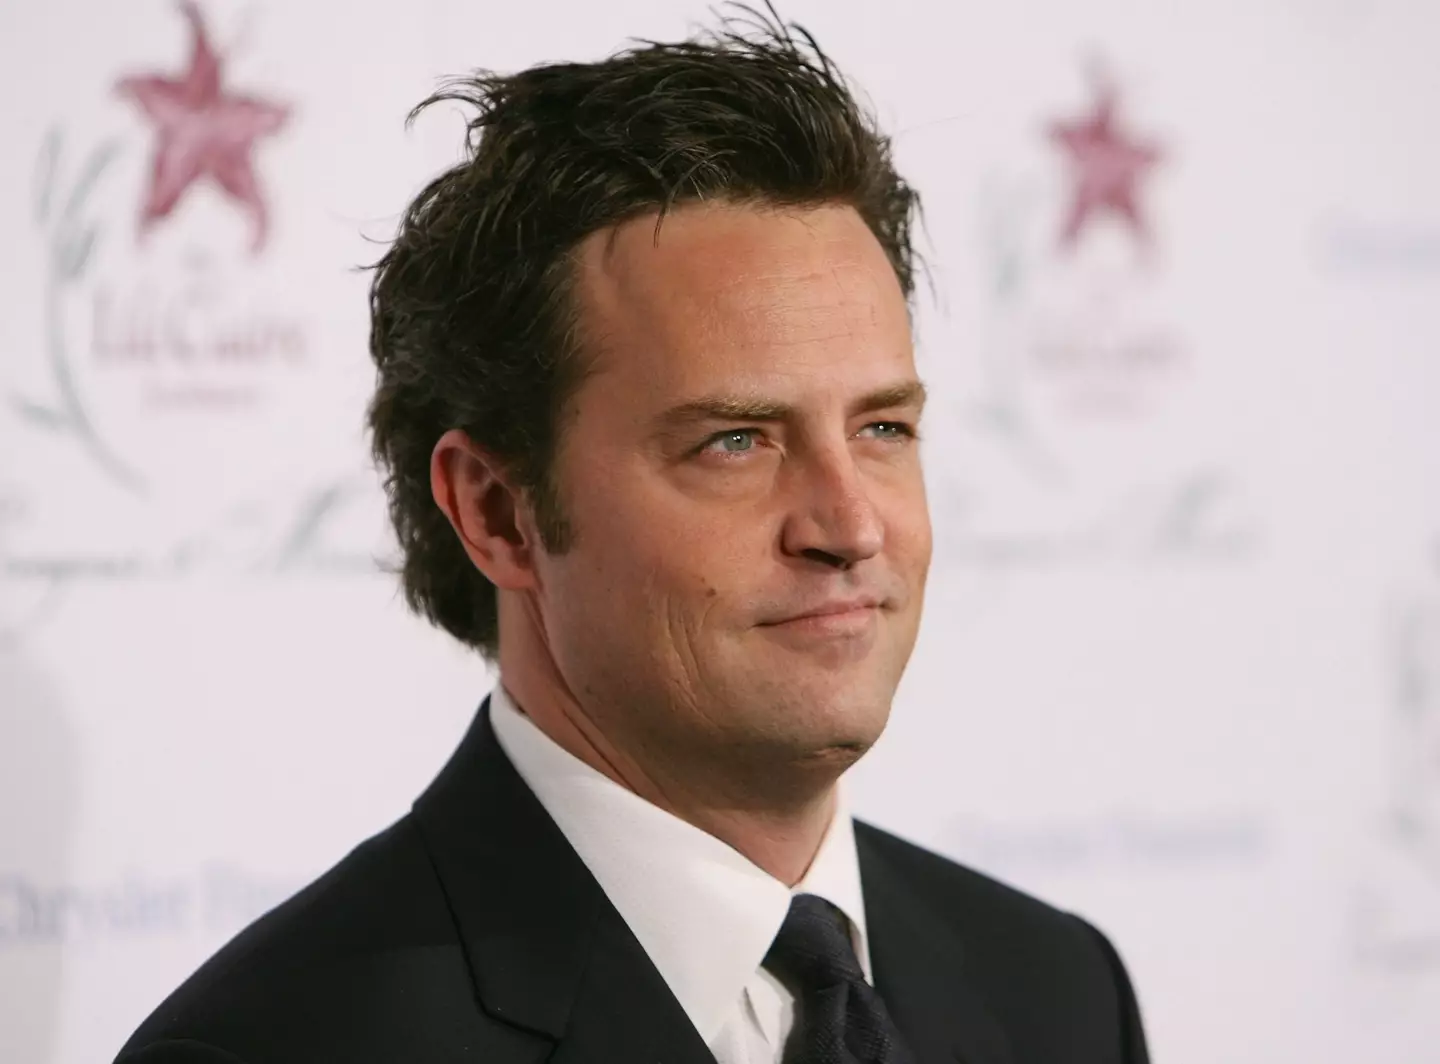 Matthew Perry revealed why the series ended in his memoir.